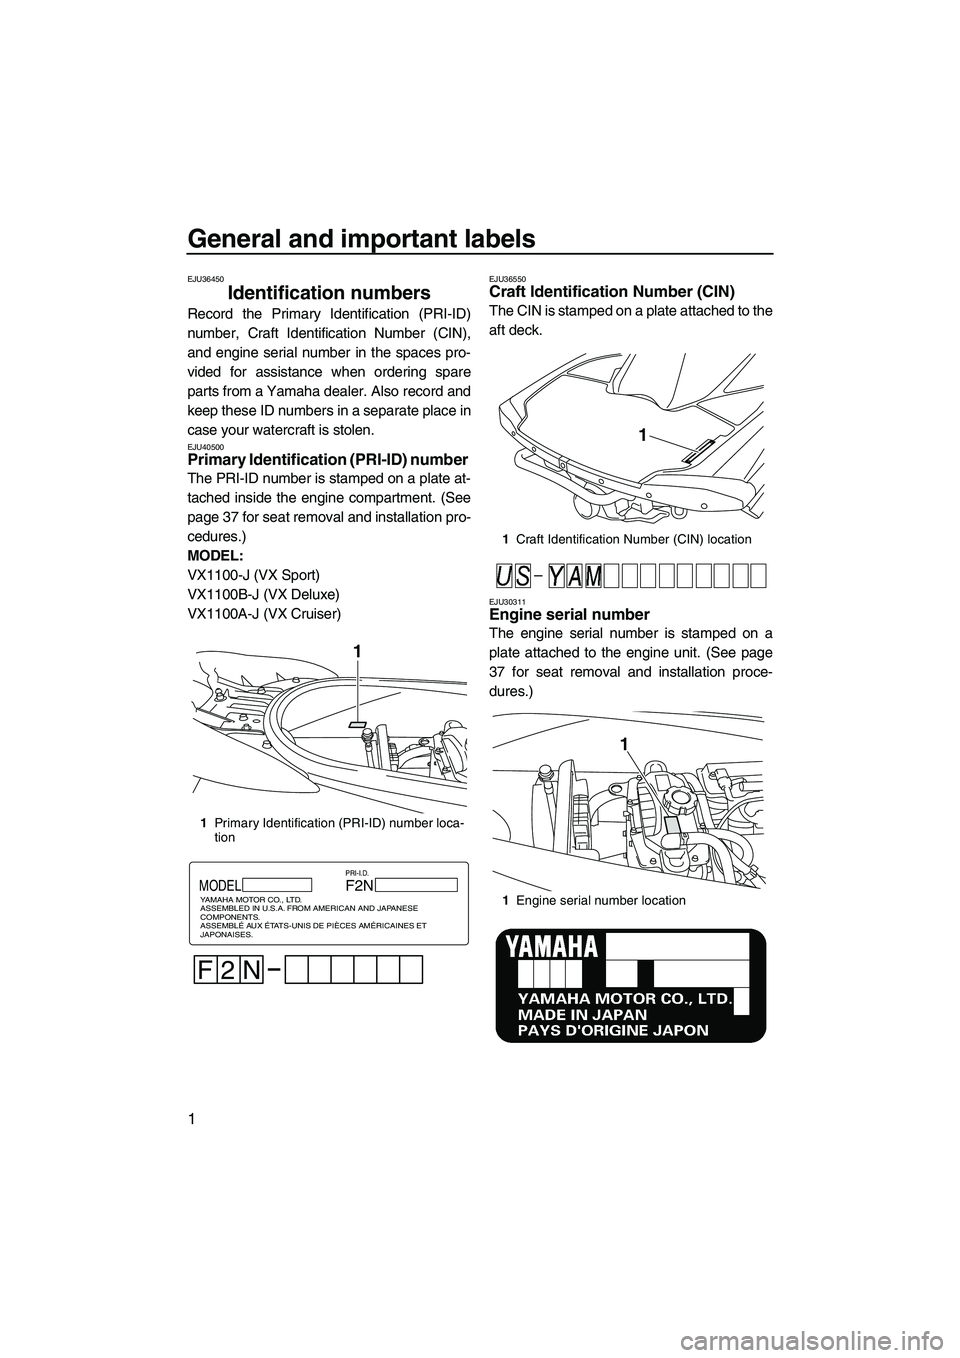 YAMAHA VX SPORT 2010  Owners Manual General and important labels
1
EJU36450
Identification numbers 
Record the Primary Identification (PRI-ID)
number, Craft Identification Number (CIN),
and engine serial number in the spaces pro-
vided 